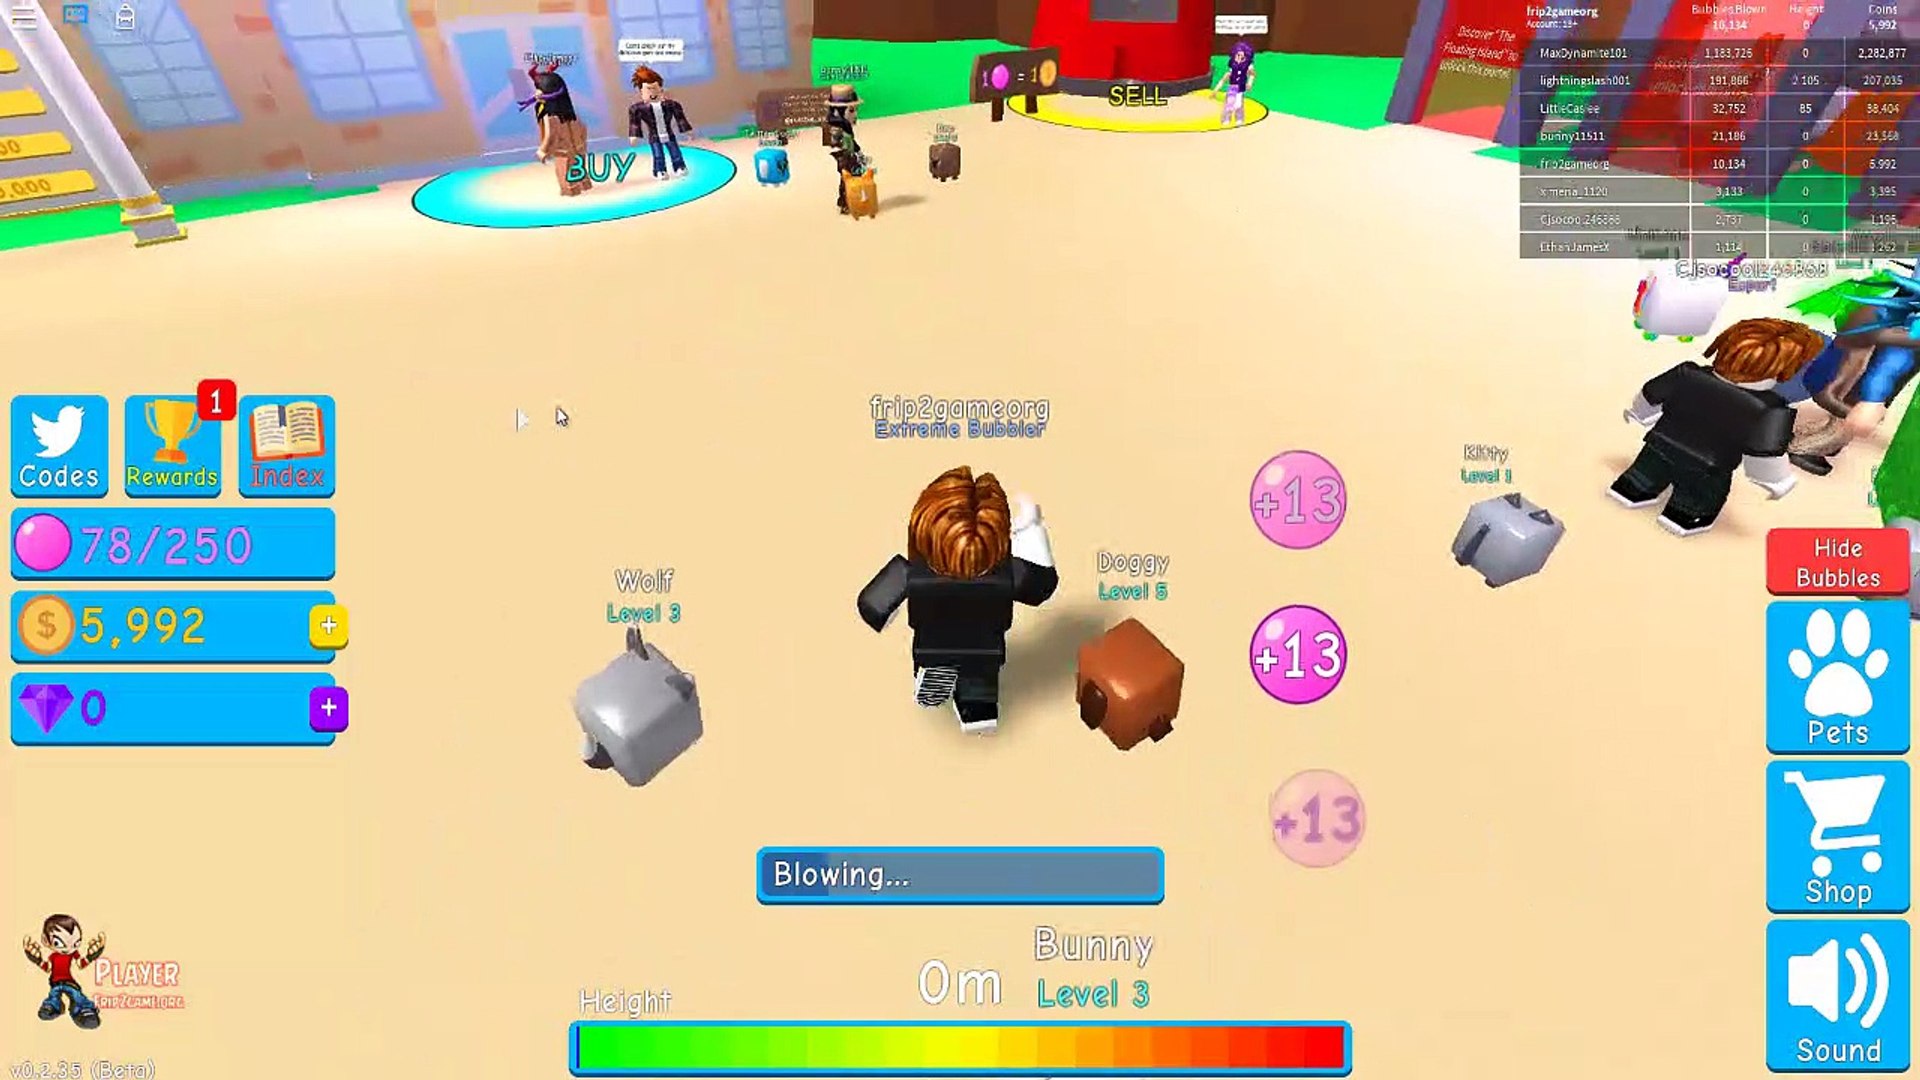 5 Codes Bubble Gum Simulator Roblox Video Dailymotion - all new codes void egg opening bubble gum simulator roblox